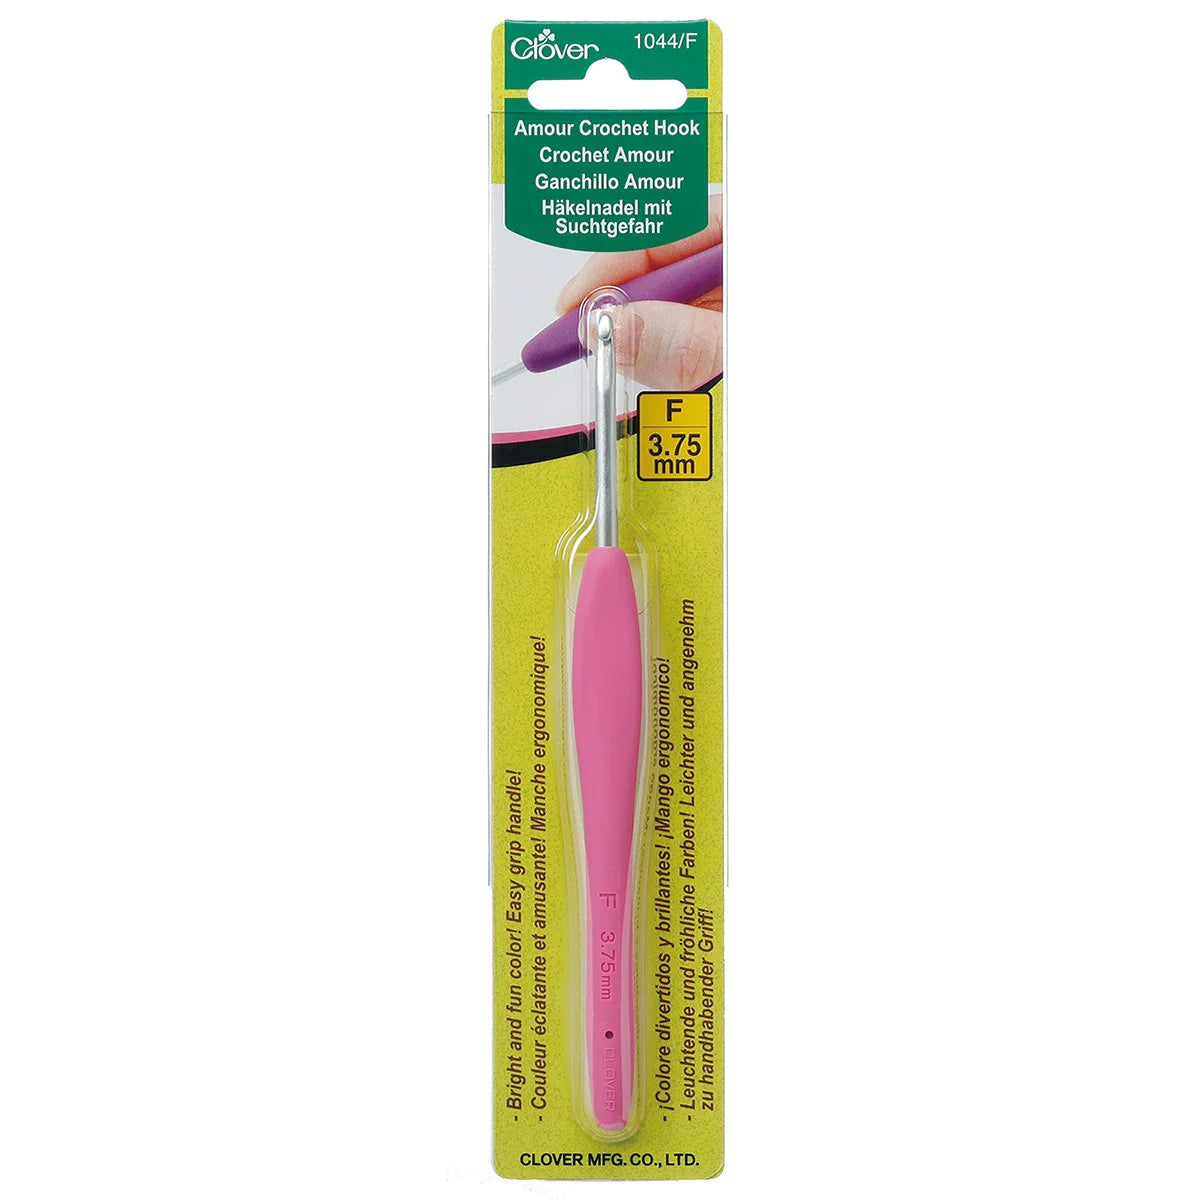 Crochet hooks: Clover Soft Touch or Amour? Which one is the one